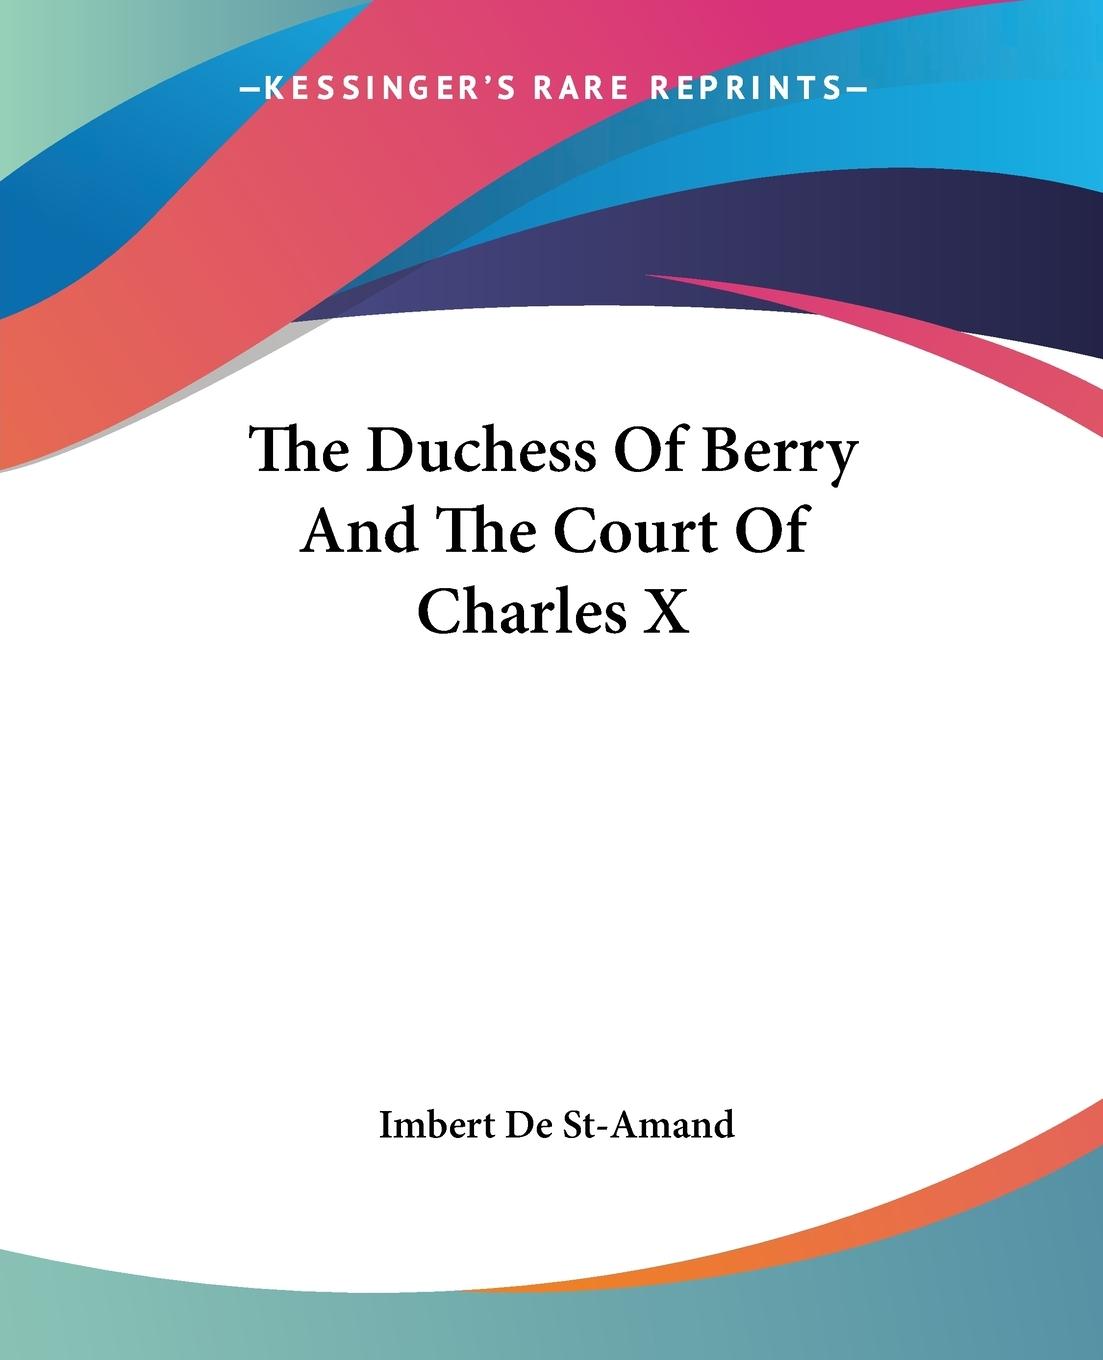 The Duchess Of Berry And The Court Of Charles X - St-Amand, Imbert de